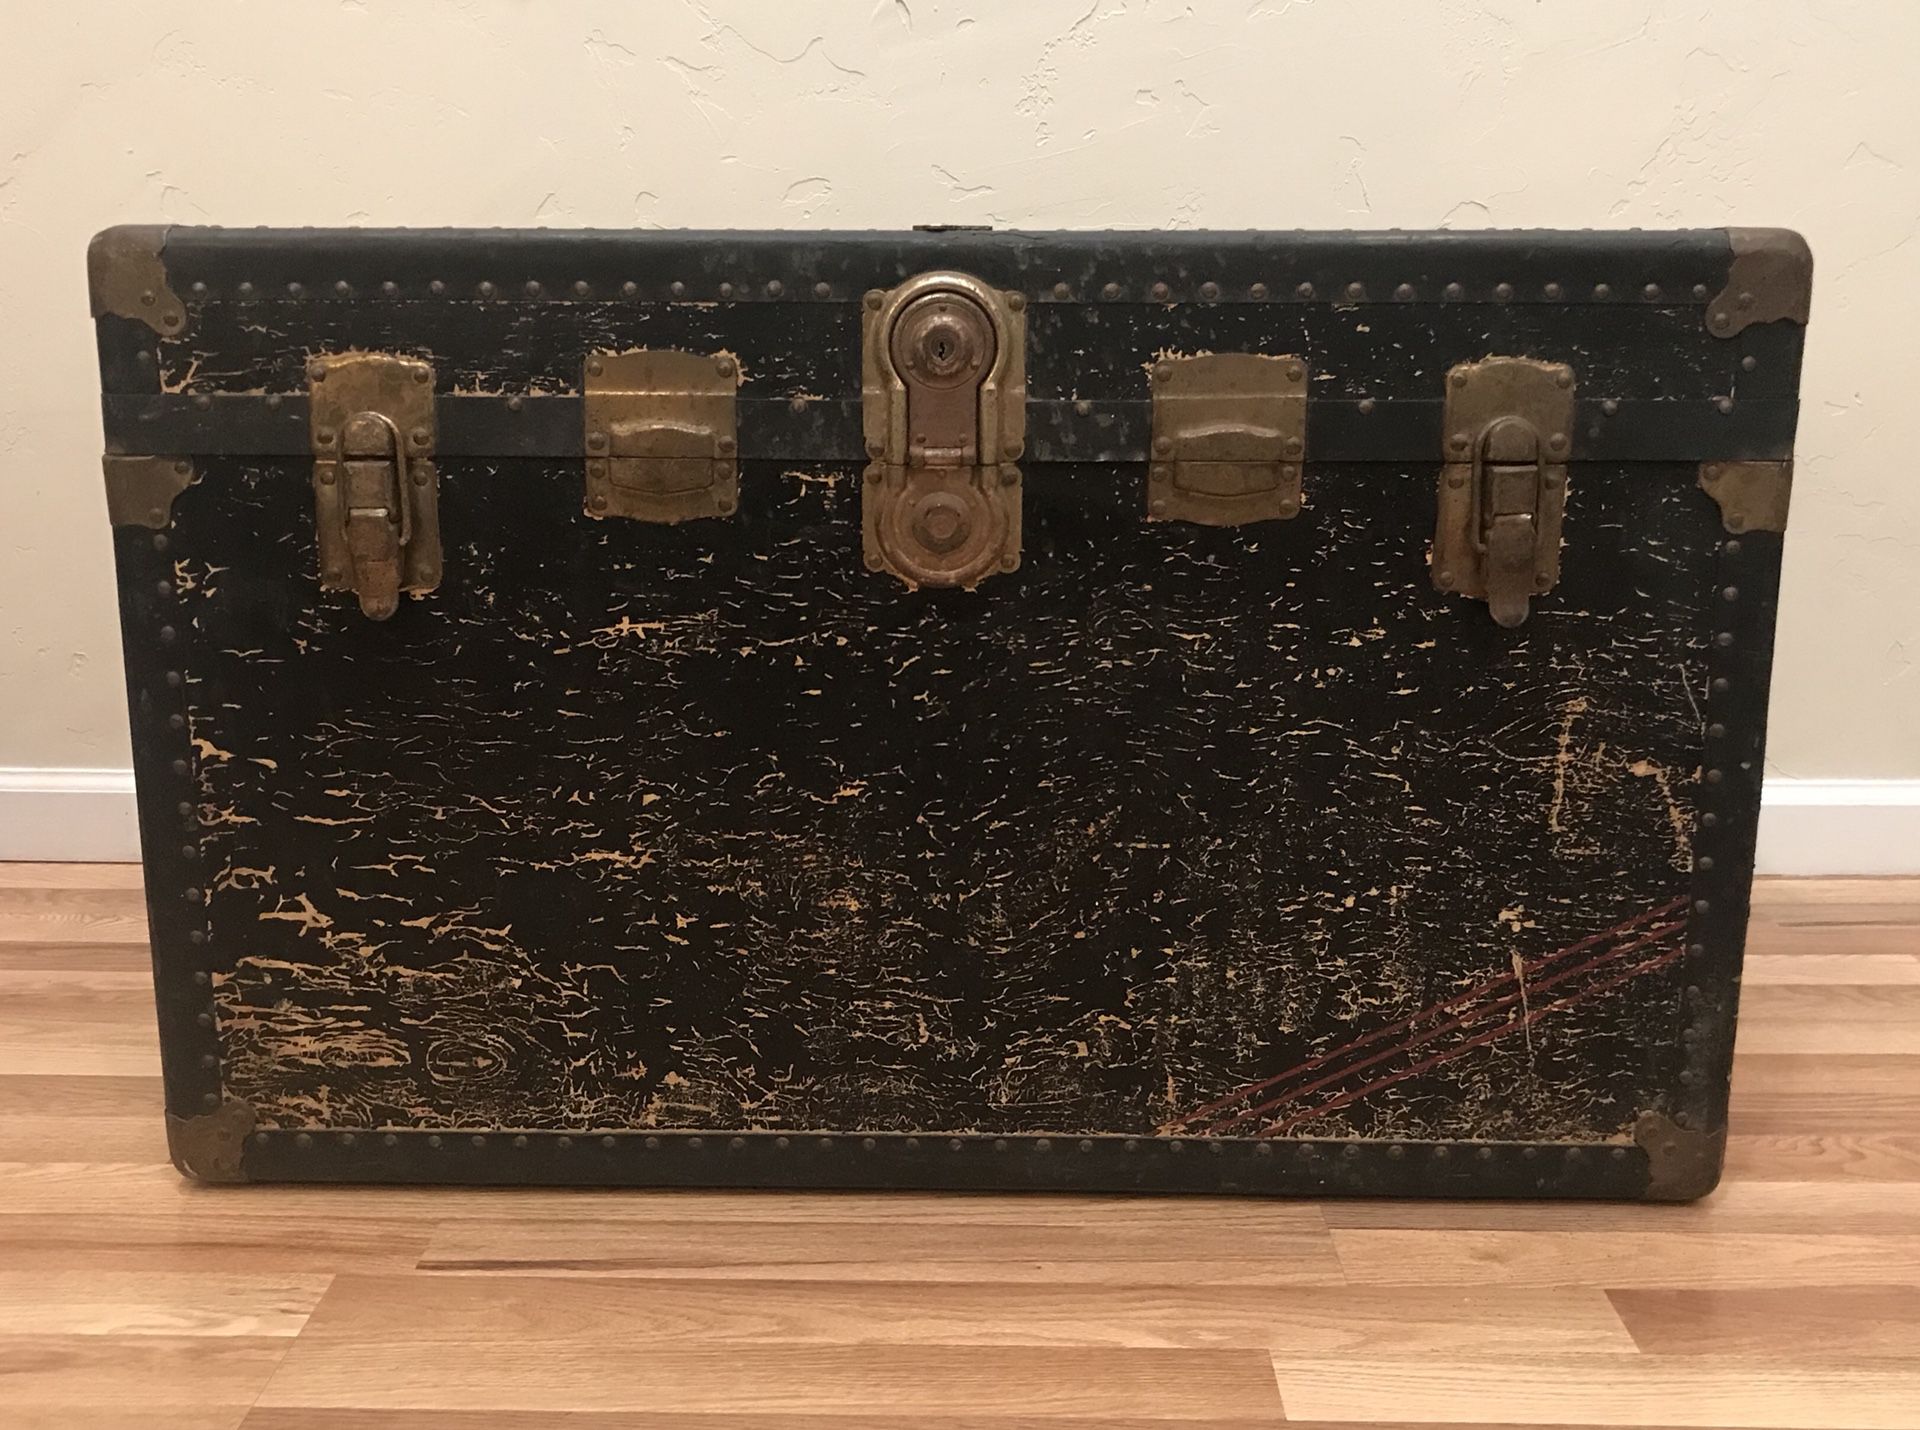 Large Antique Horn Luggage Steamer Trunk for Sale in Albuquerque, NM -  OfferUp